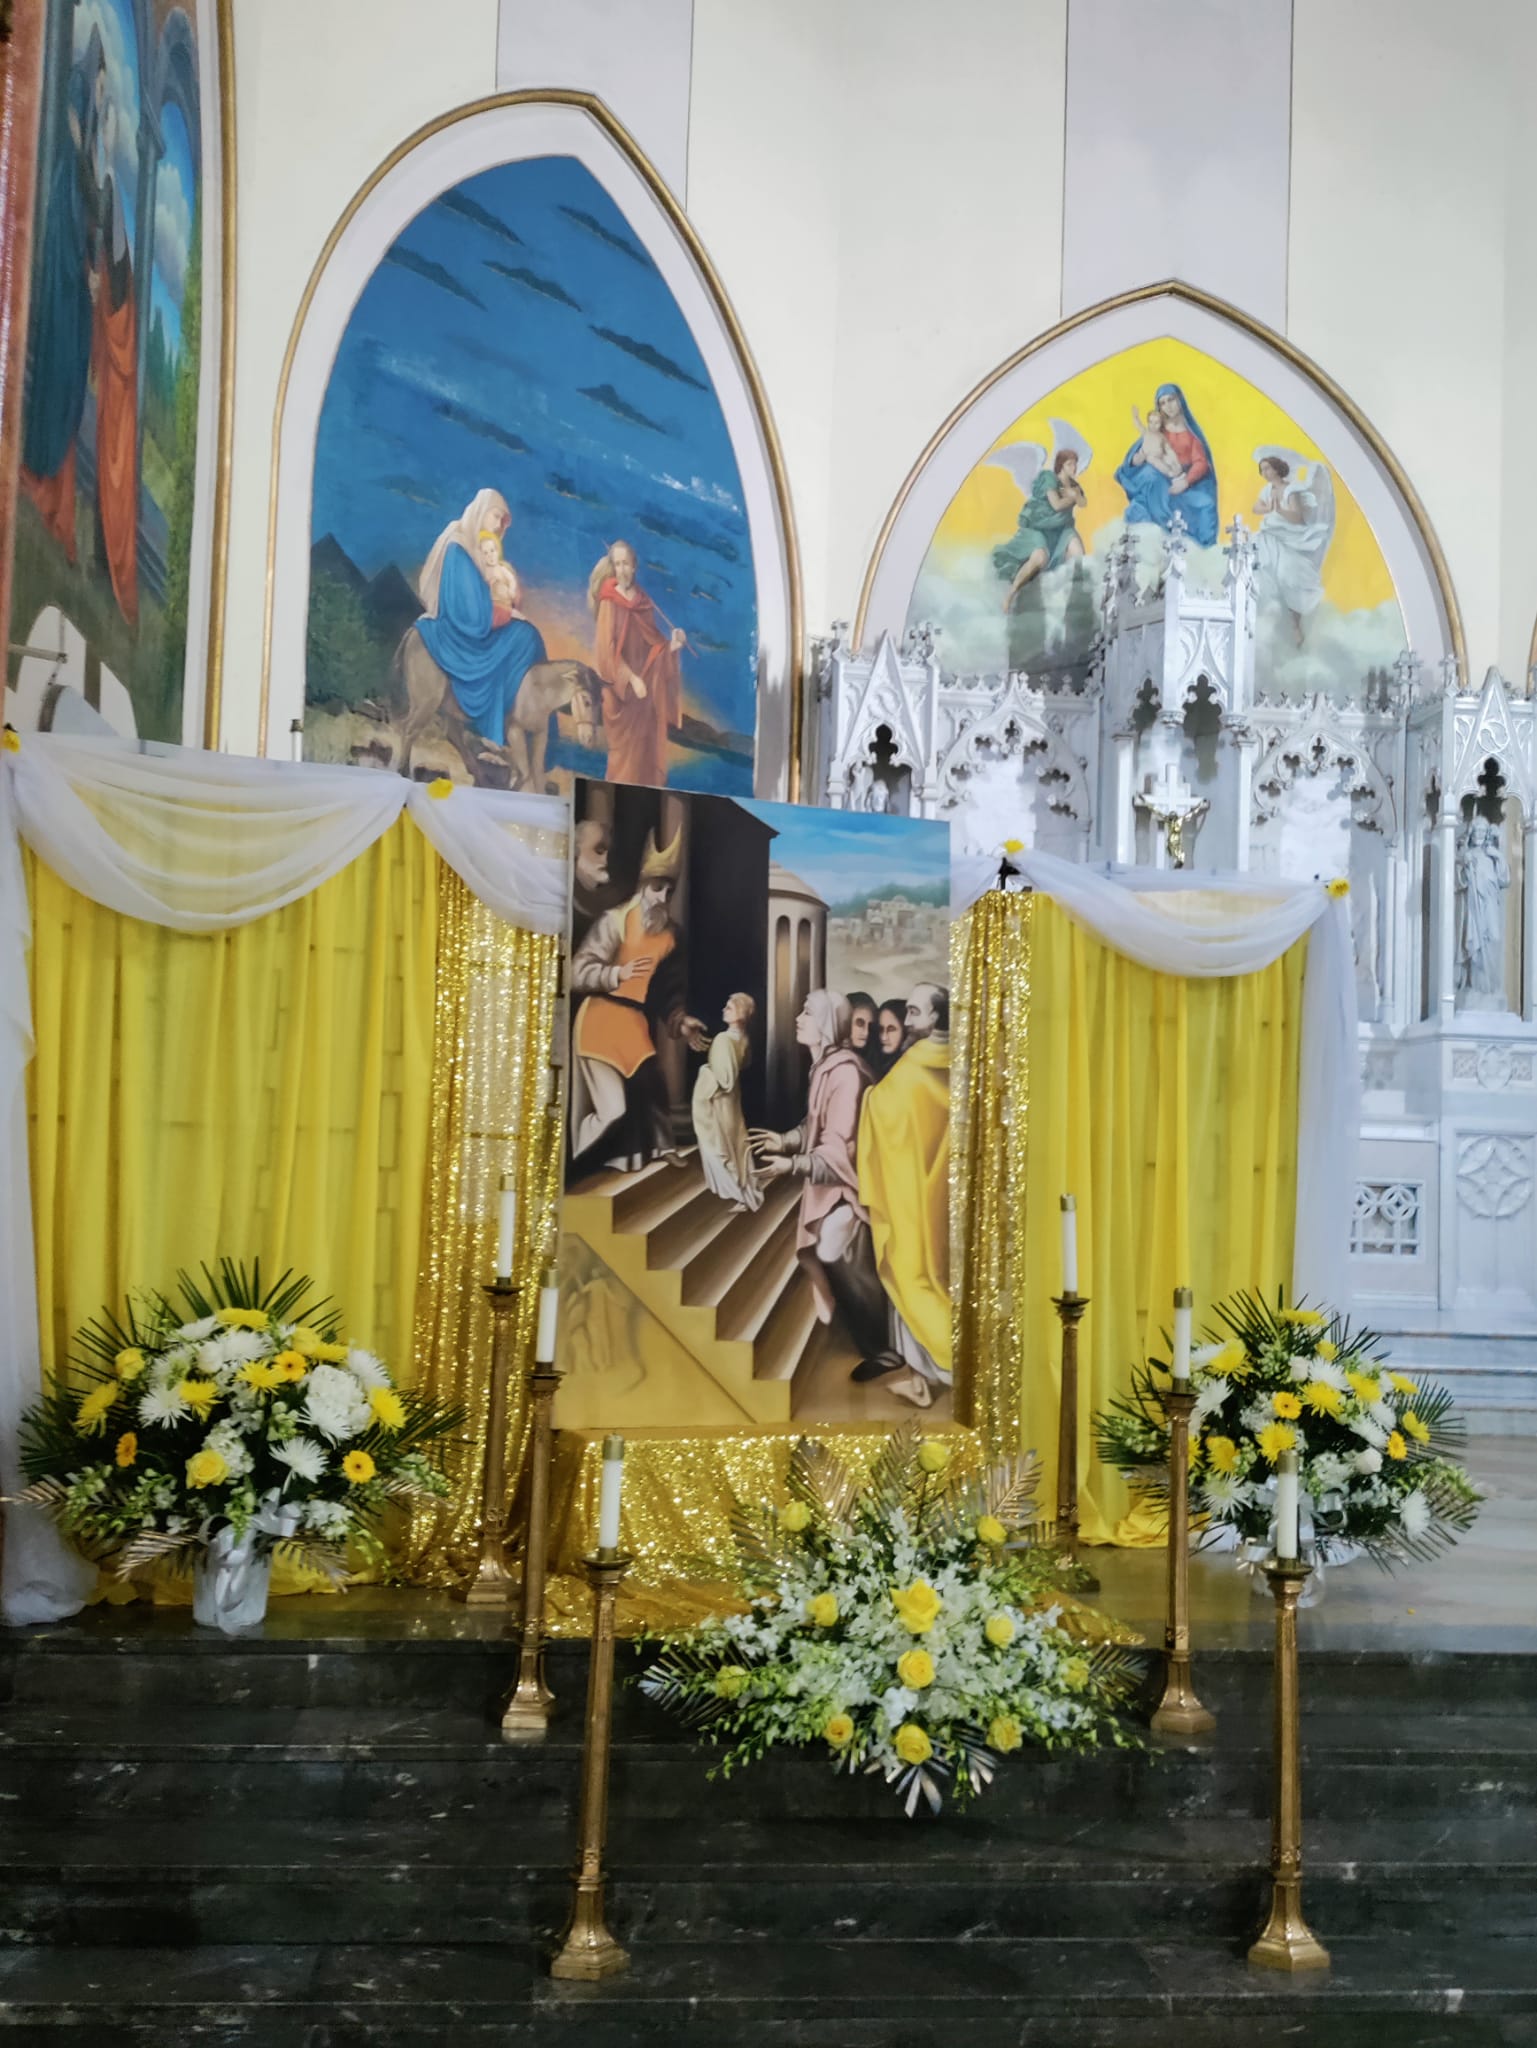 A painting of jesus is on display in front of the altar.